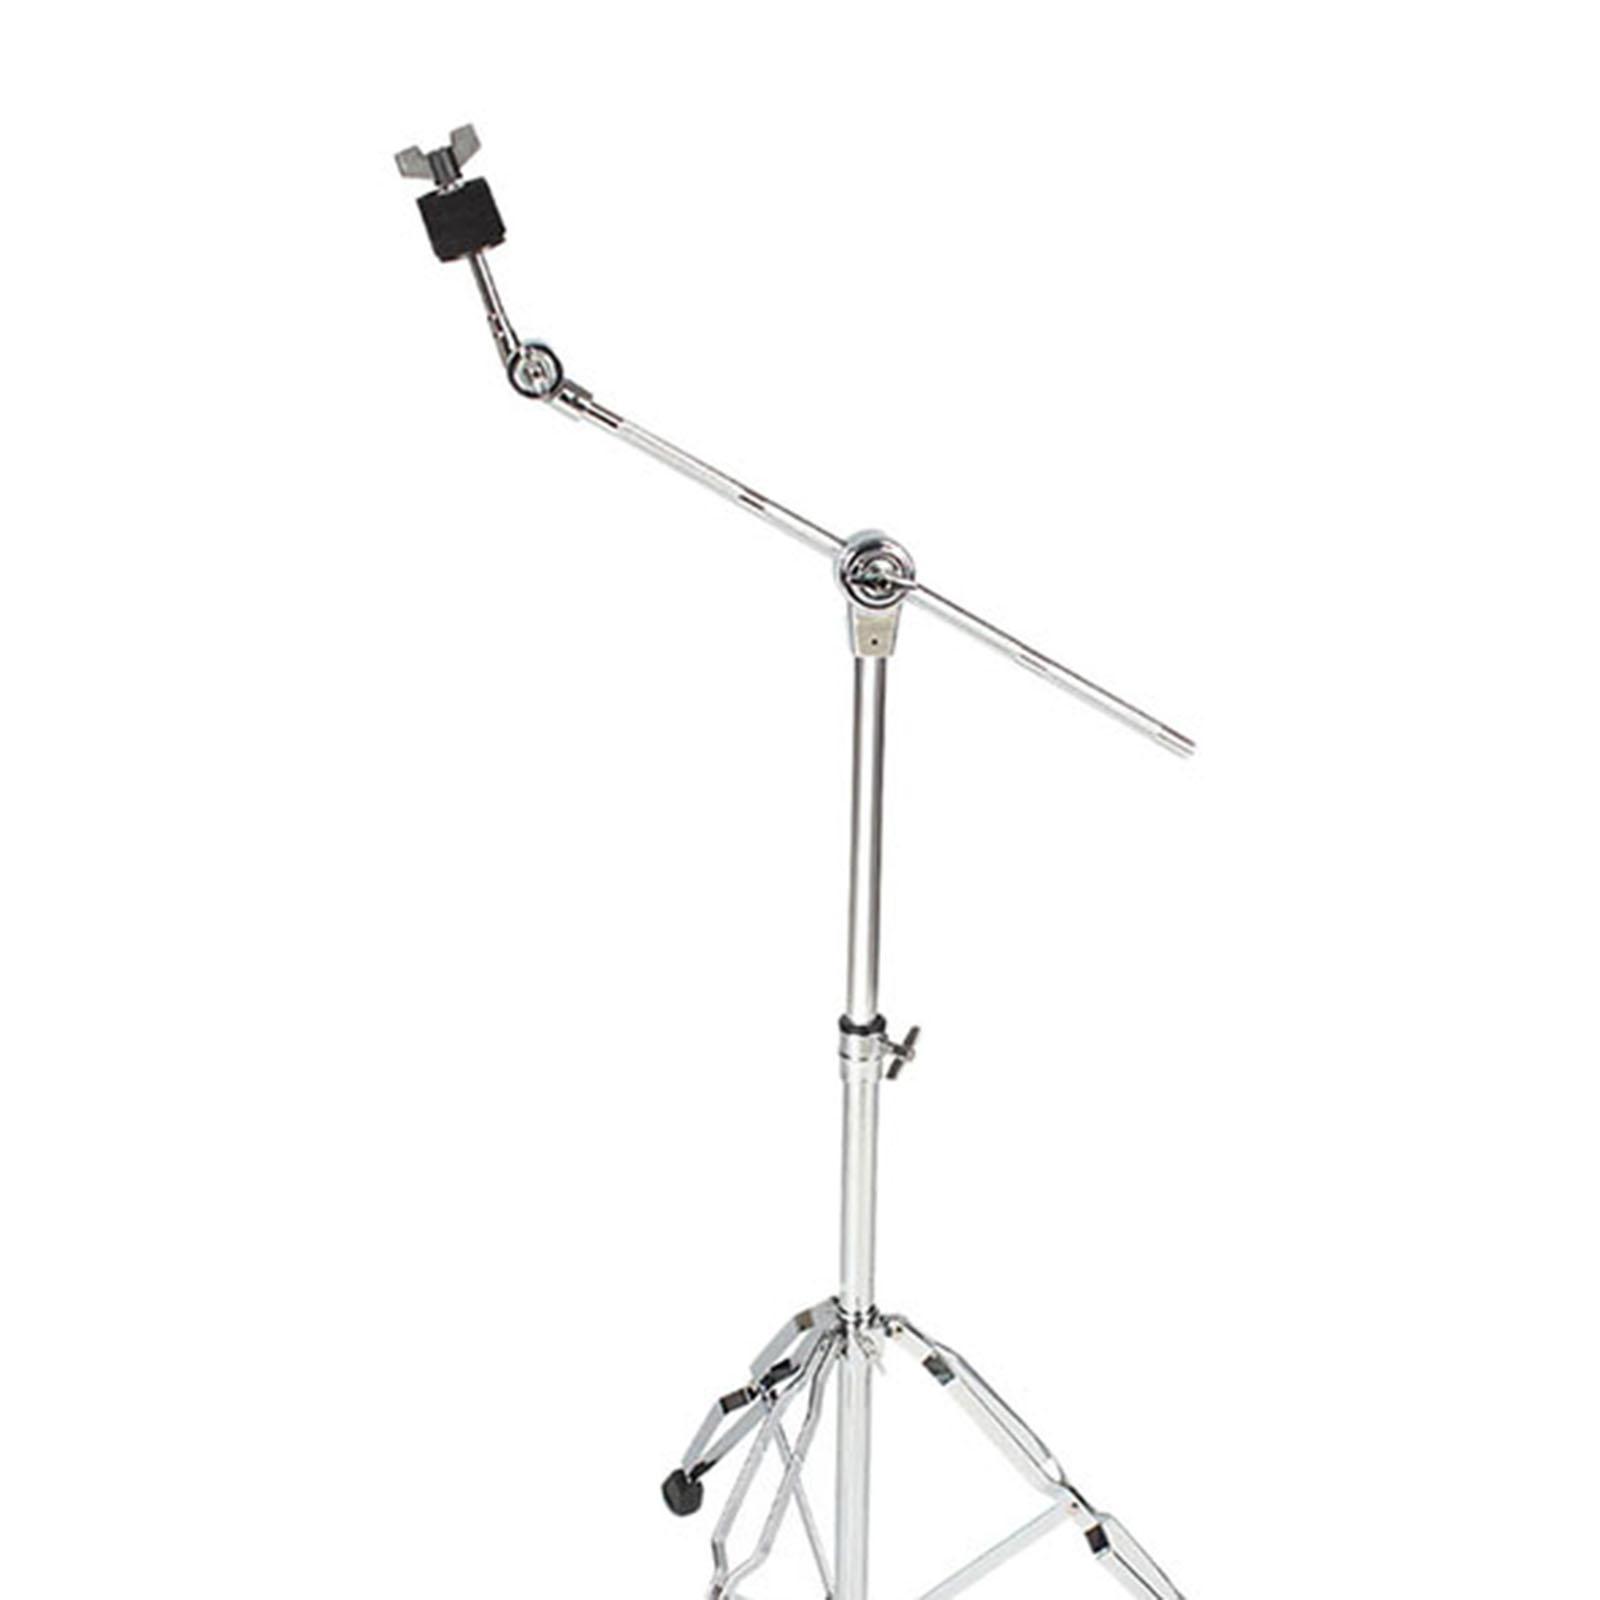 Cymbal Stand Adjustable Foldable Full Metal Stable Triangular Stand